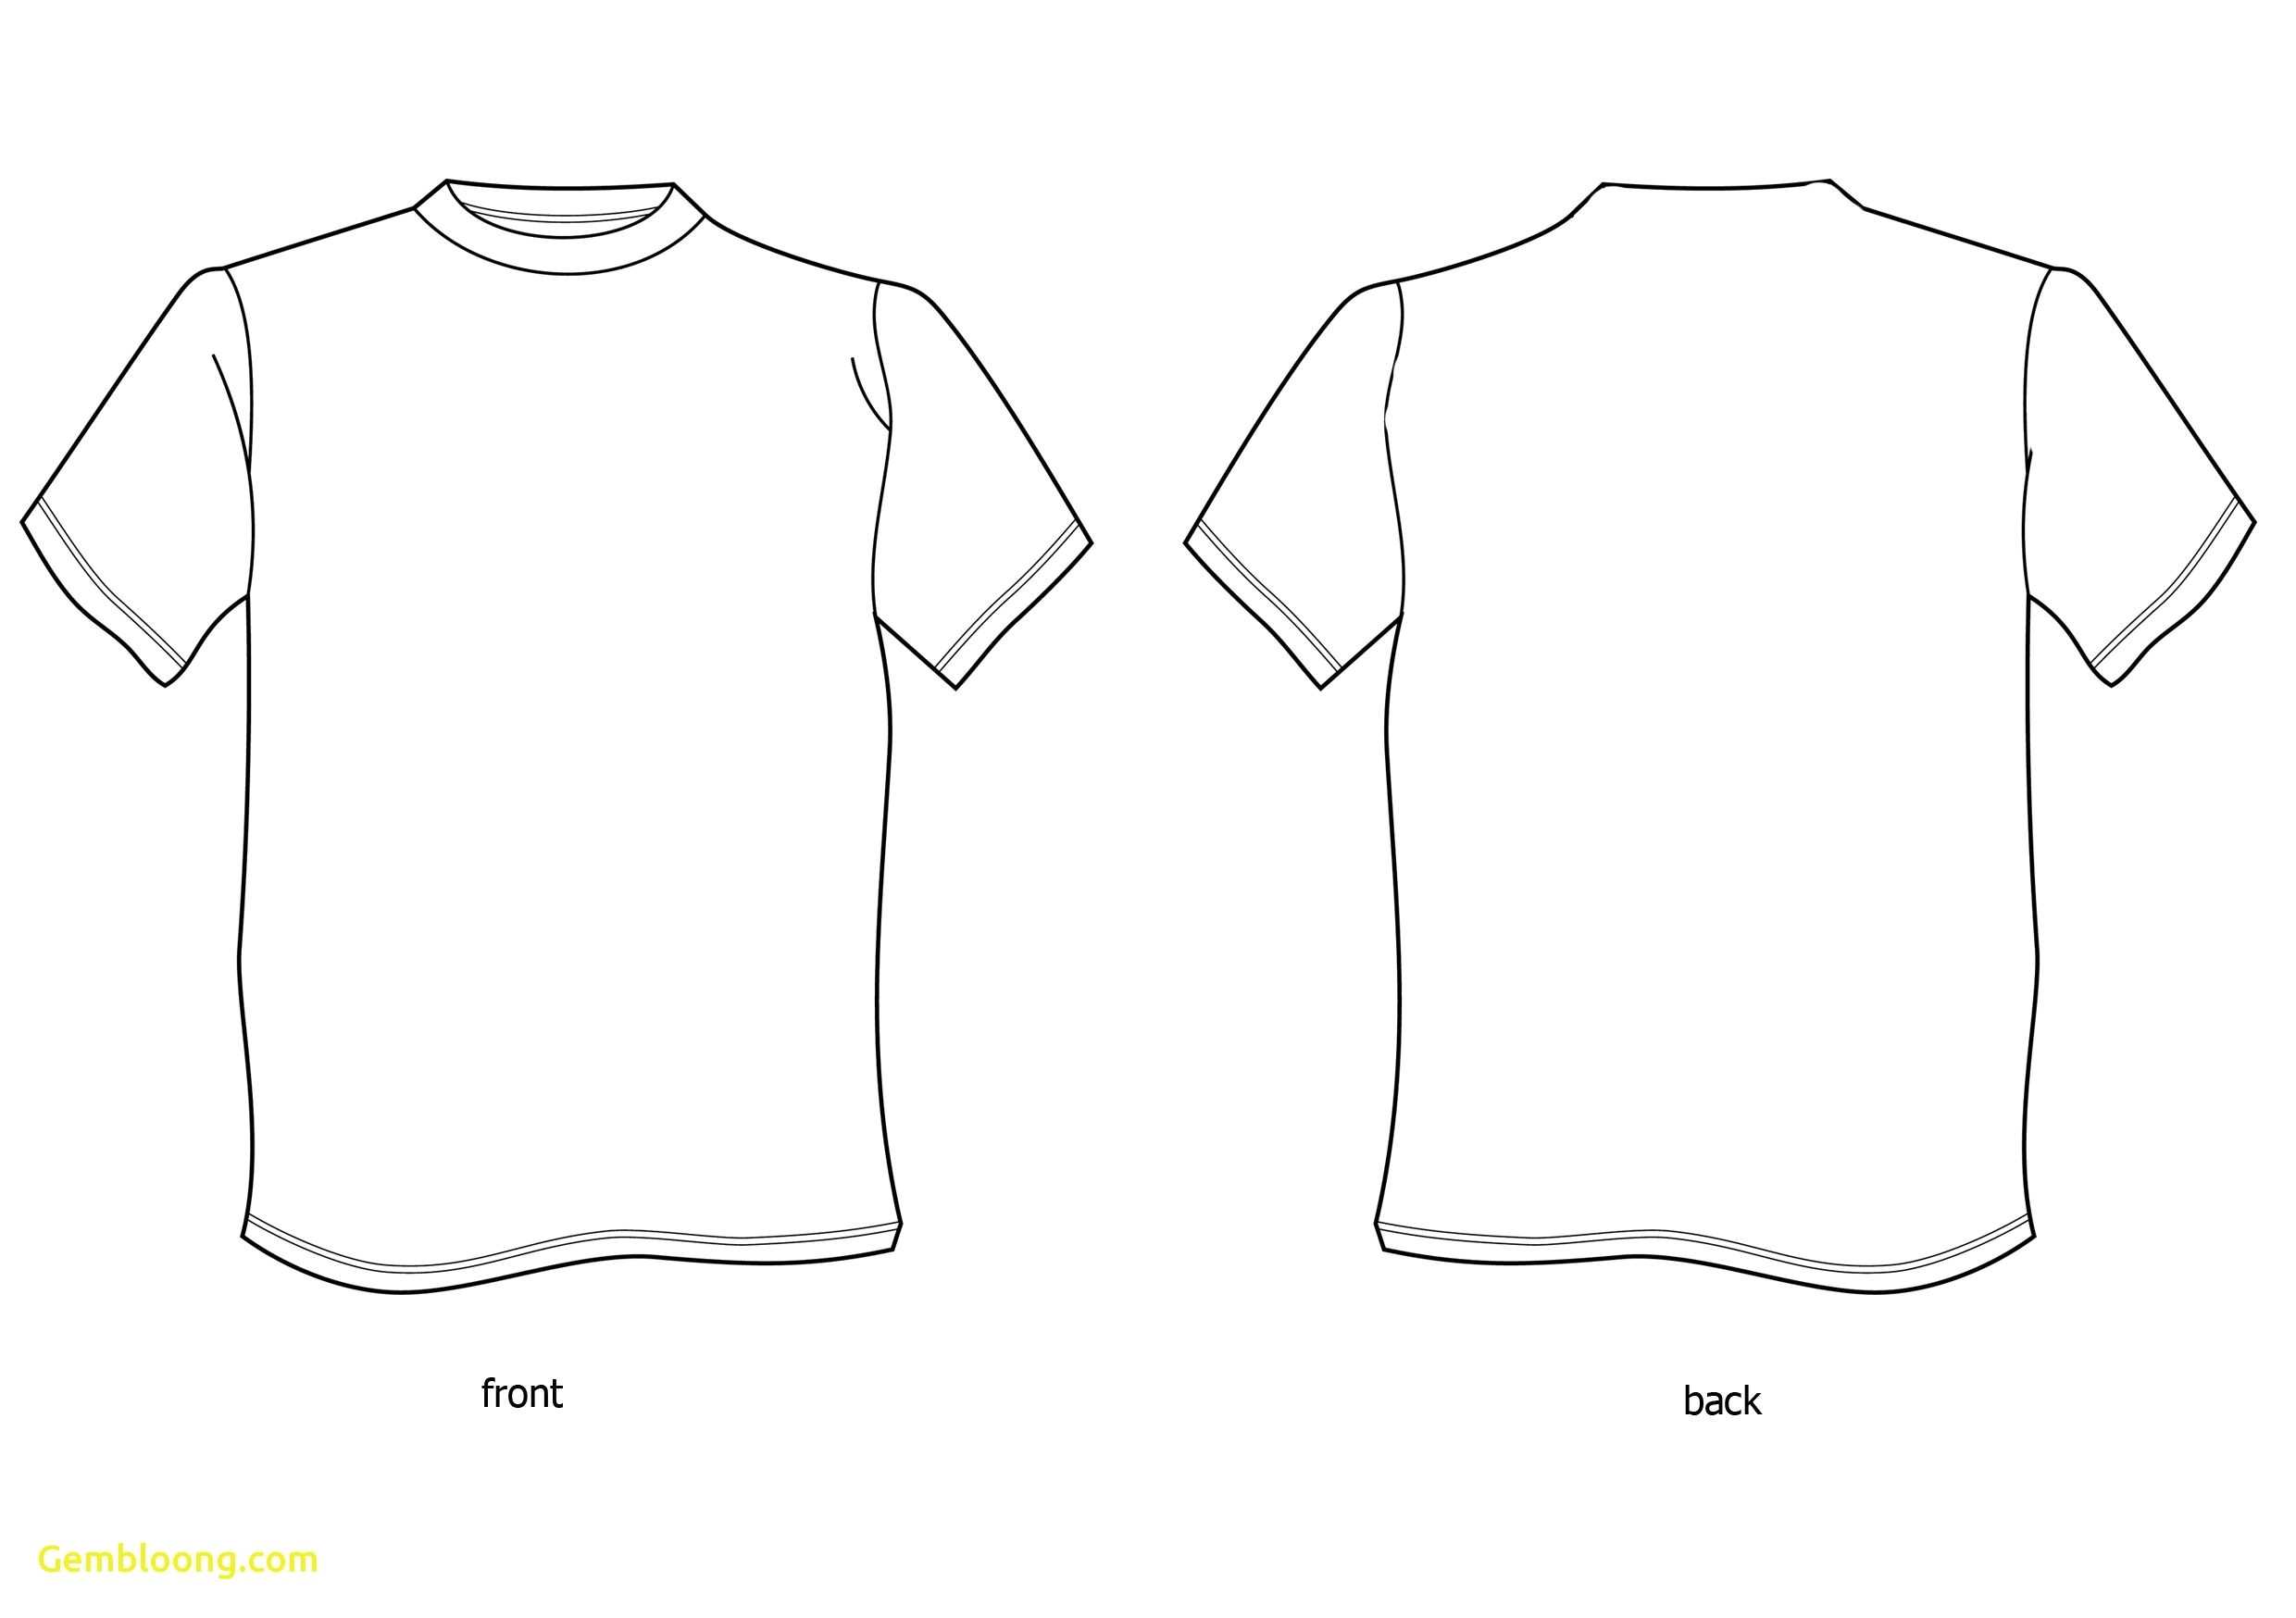 Shirt Vector Template At Getdrawings | Free Download Pertaining To Printable Blank Tshirt Template